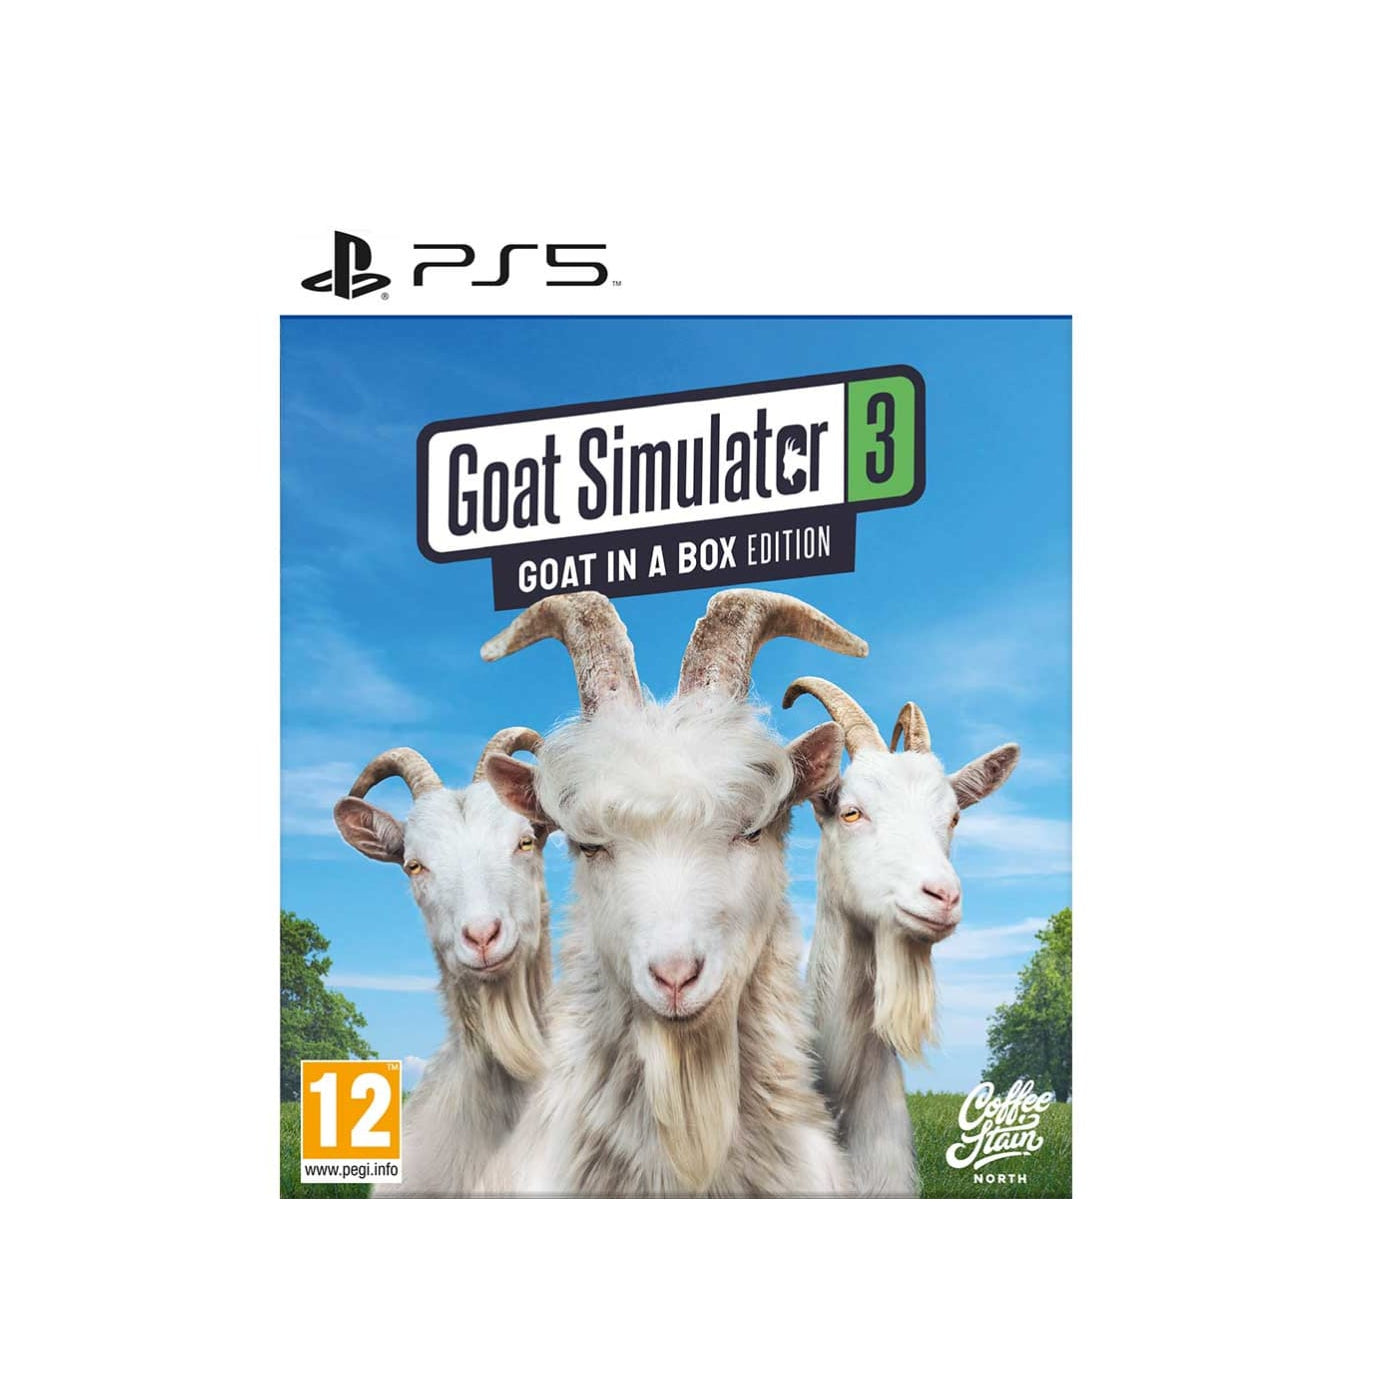 Goat Simulator 3 Goat In A Box Edition (PS5)